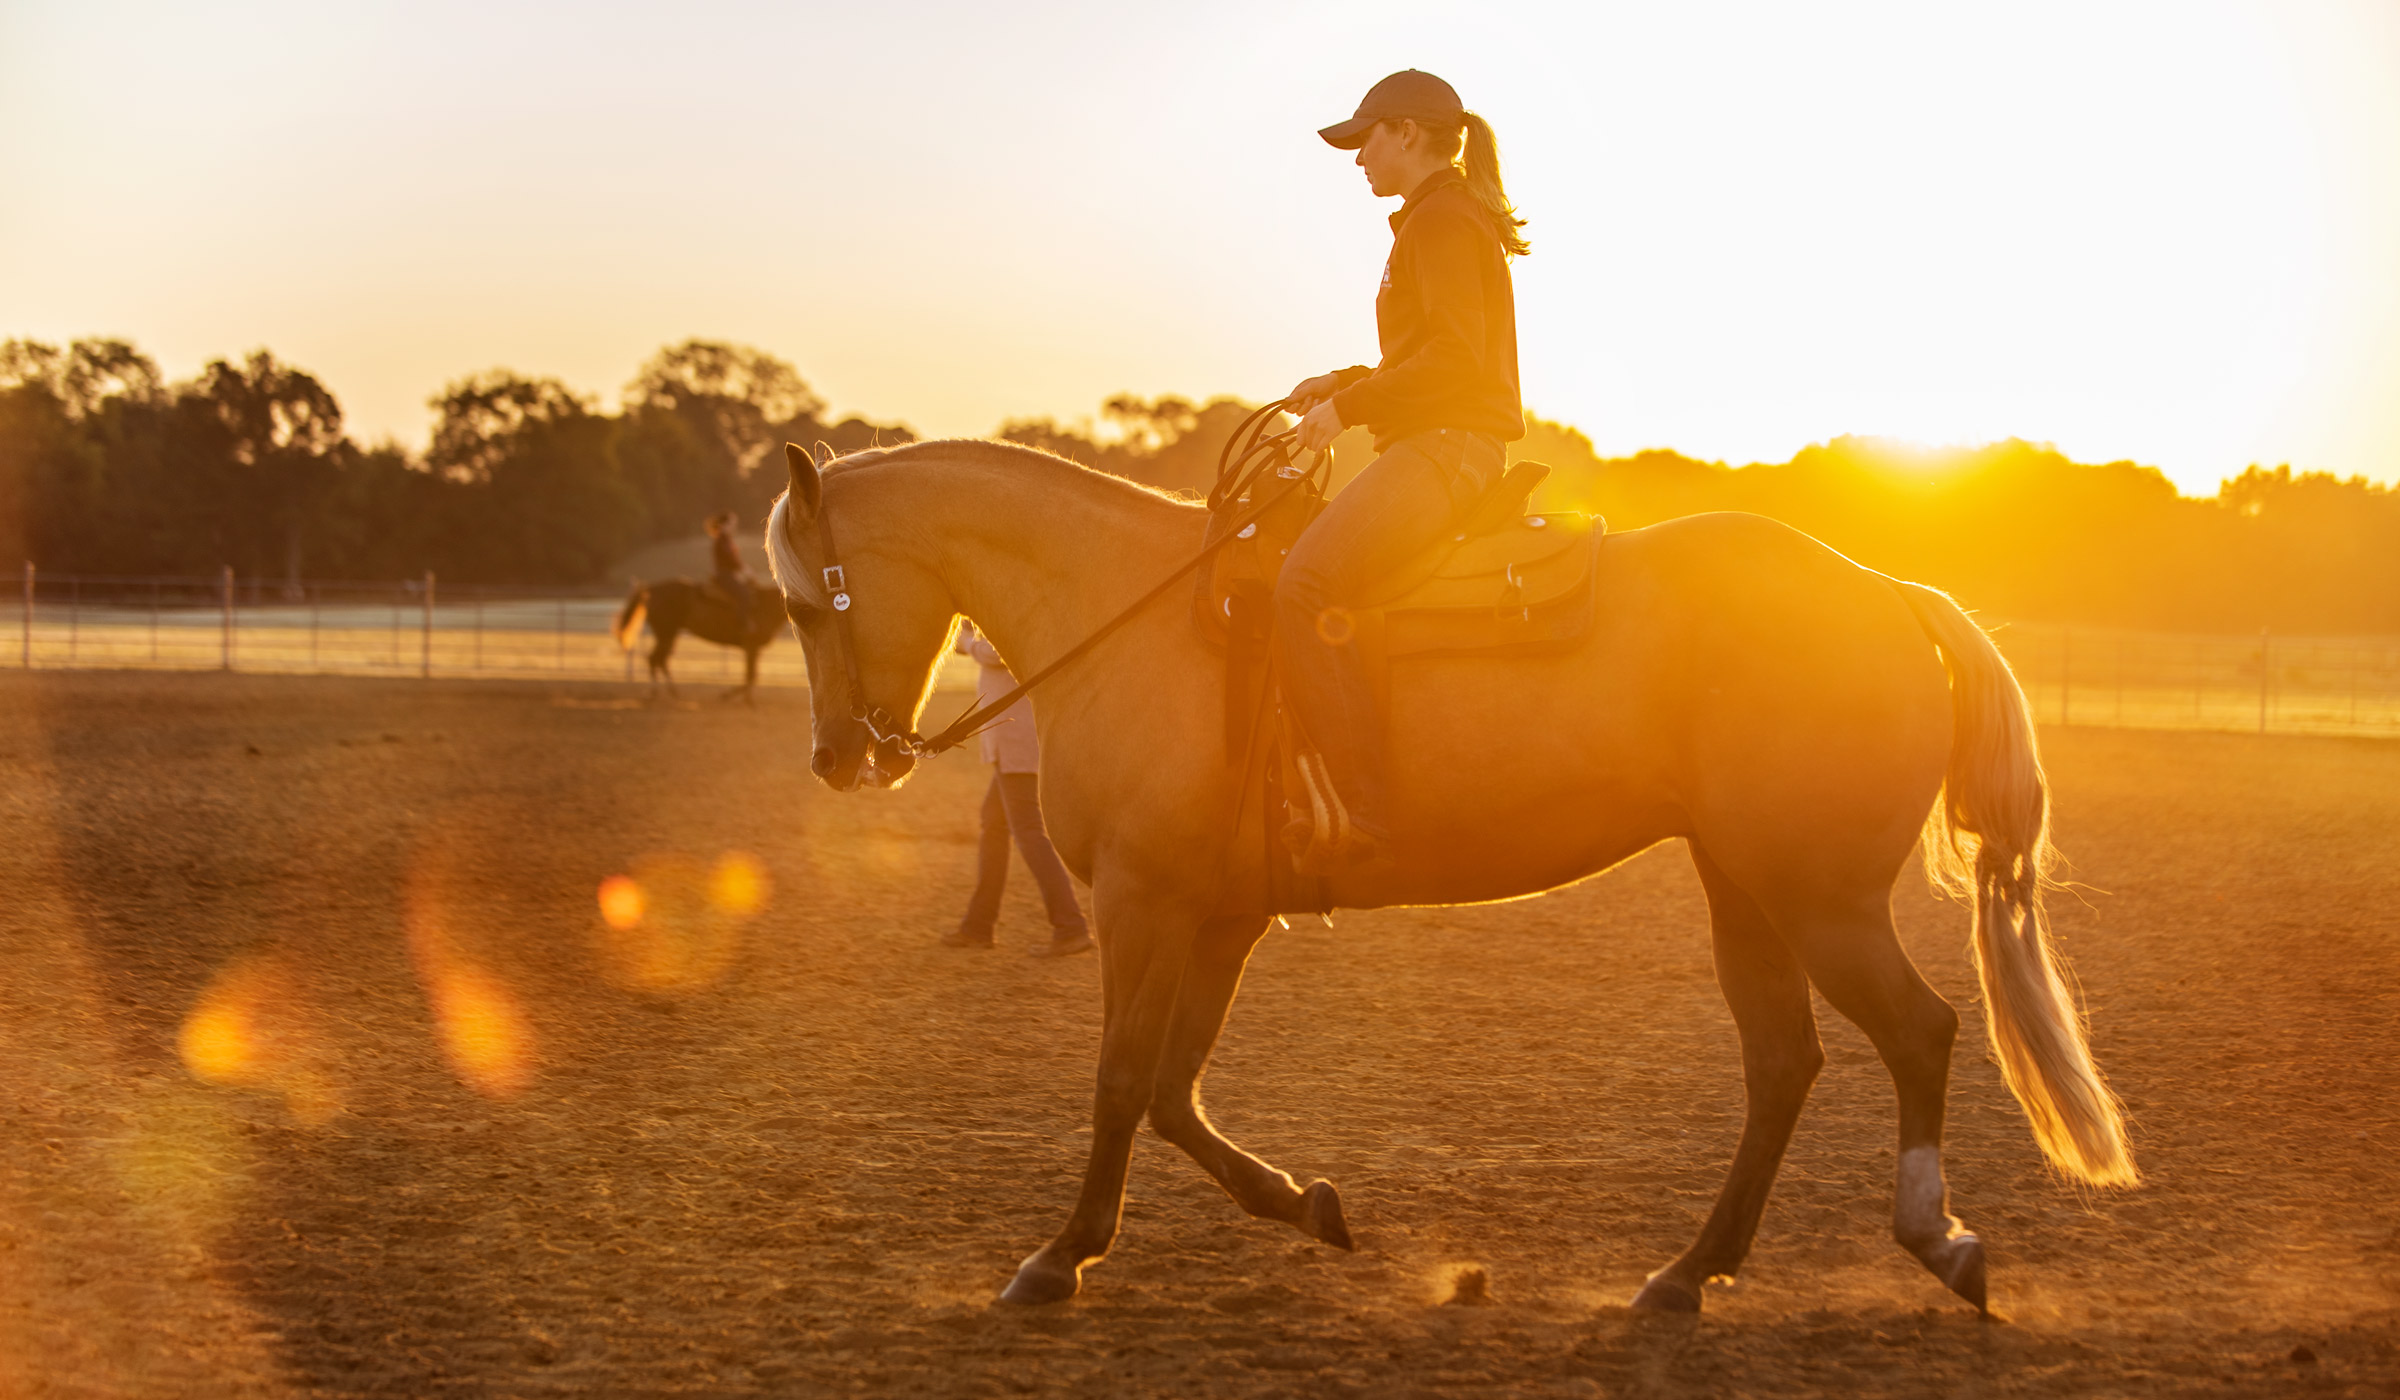 With the morning sunbeams around her, student Equestrian Club member  Jillian Conner rides her horse while kicking up dust.